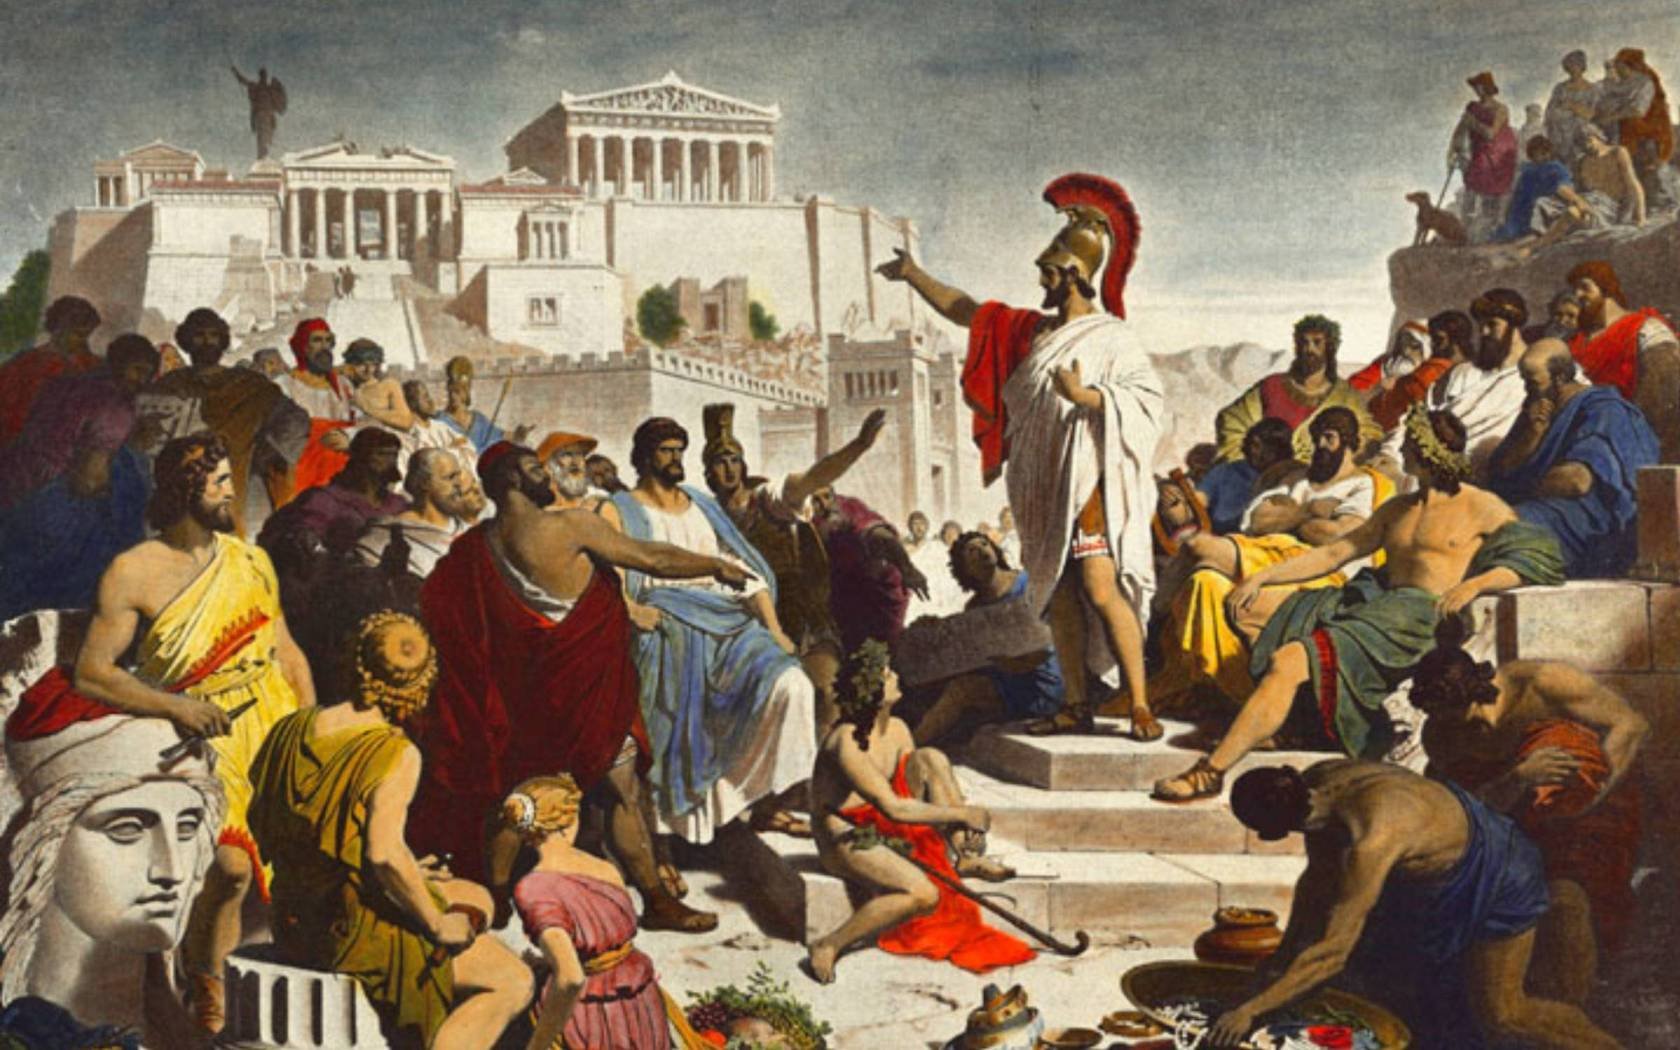 Pericles' Funeral Oration (Perikles hält die Leichenrede) by Philipp Foltz (1852)